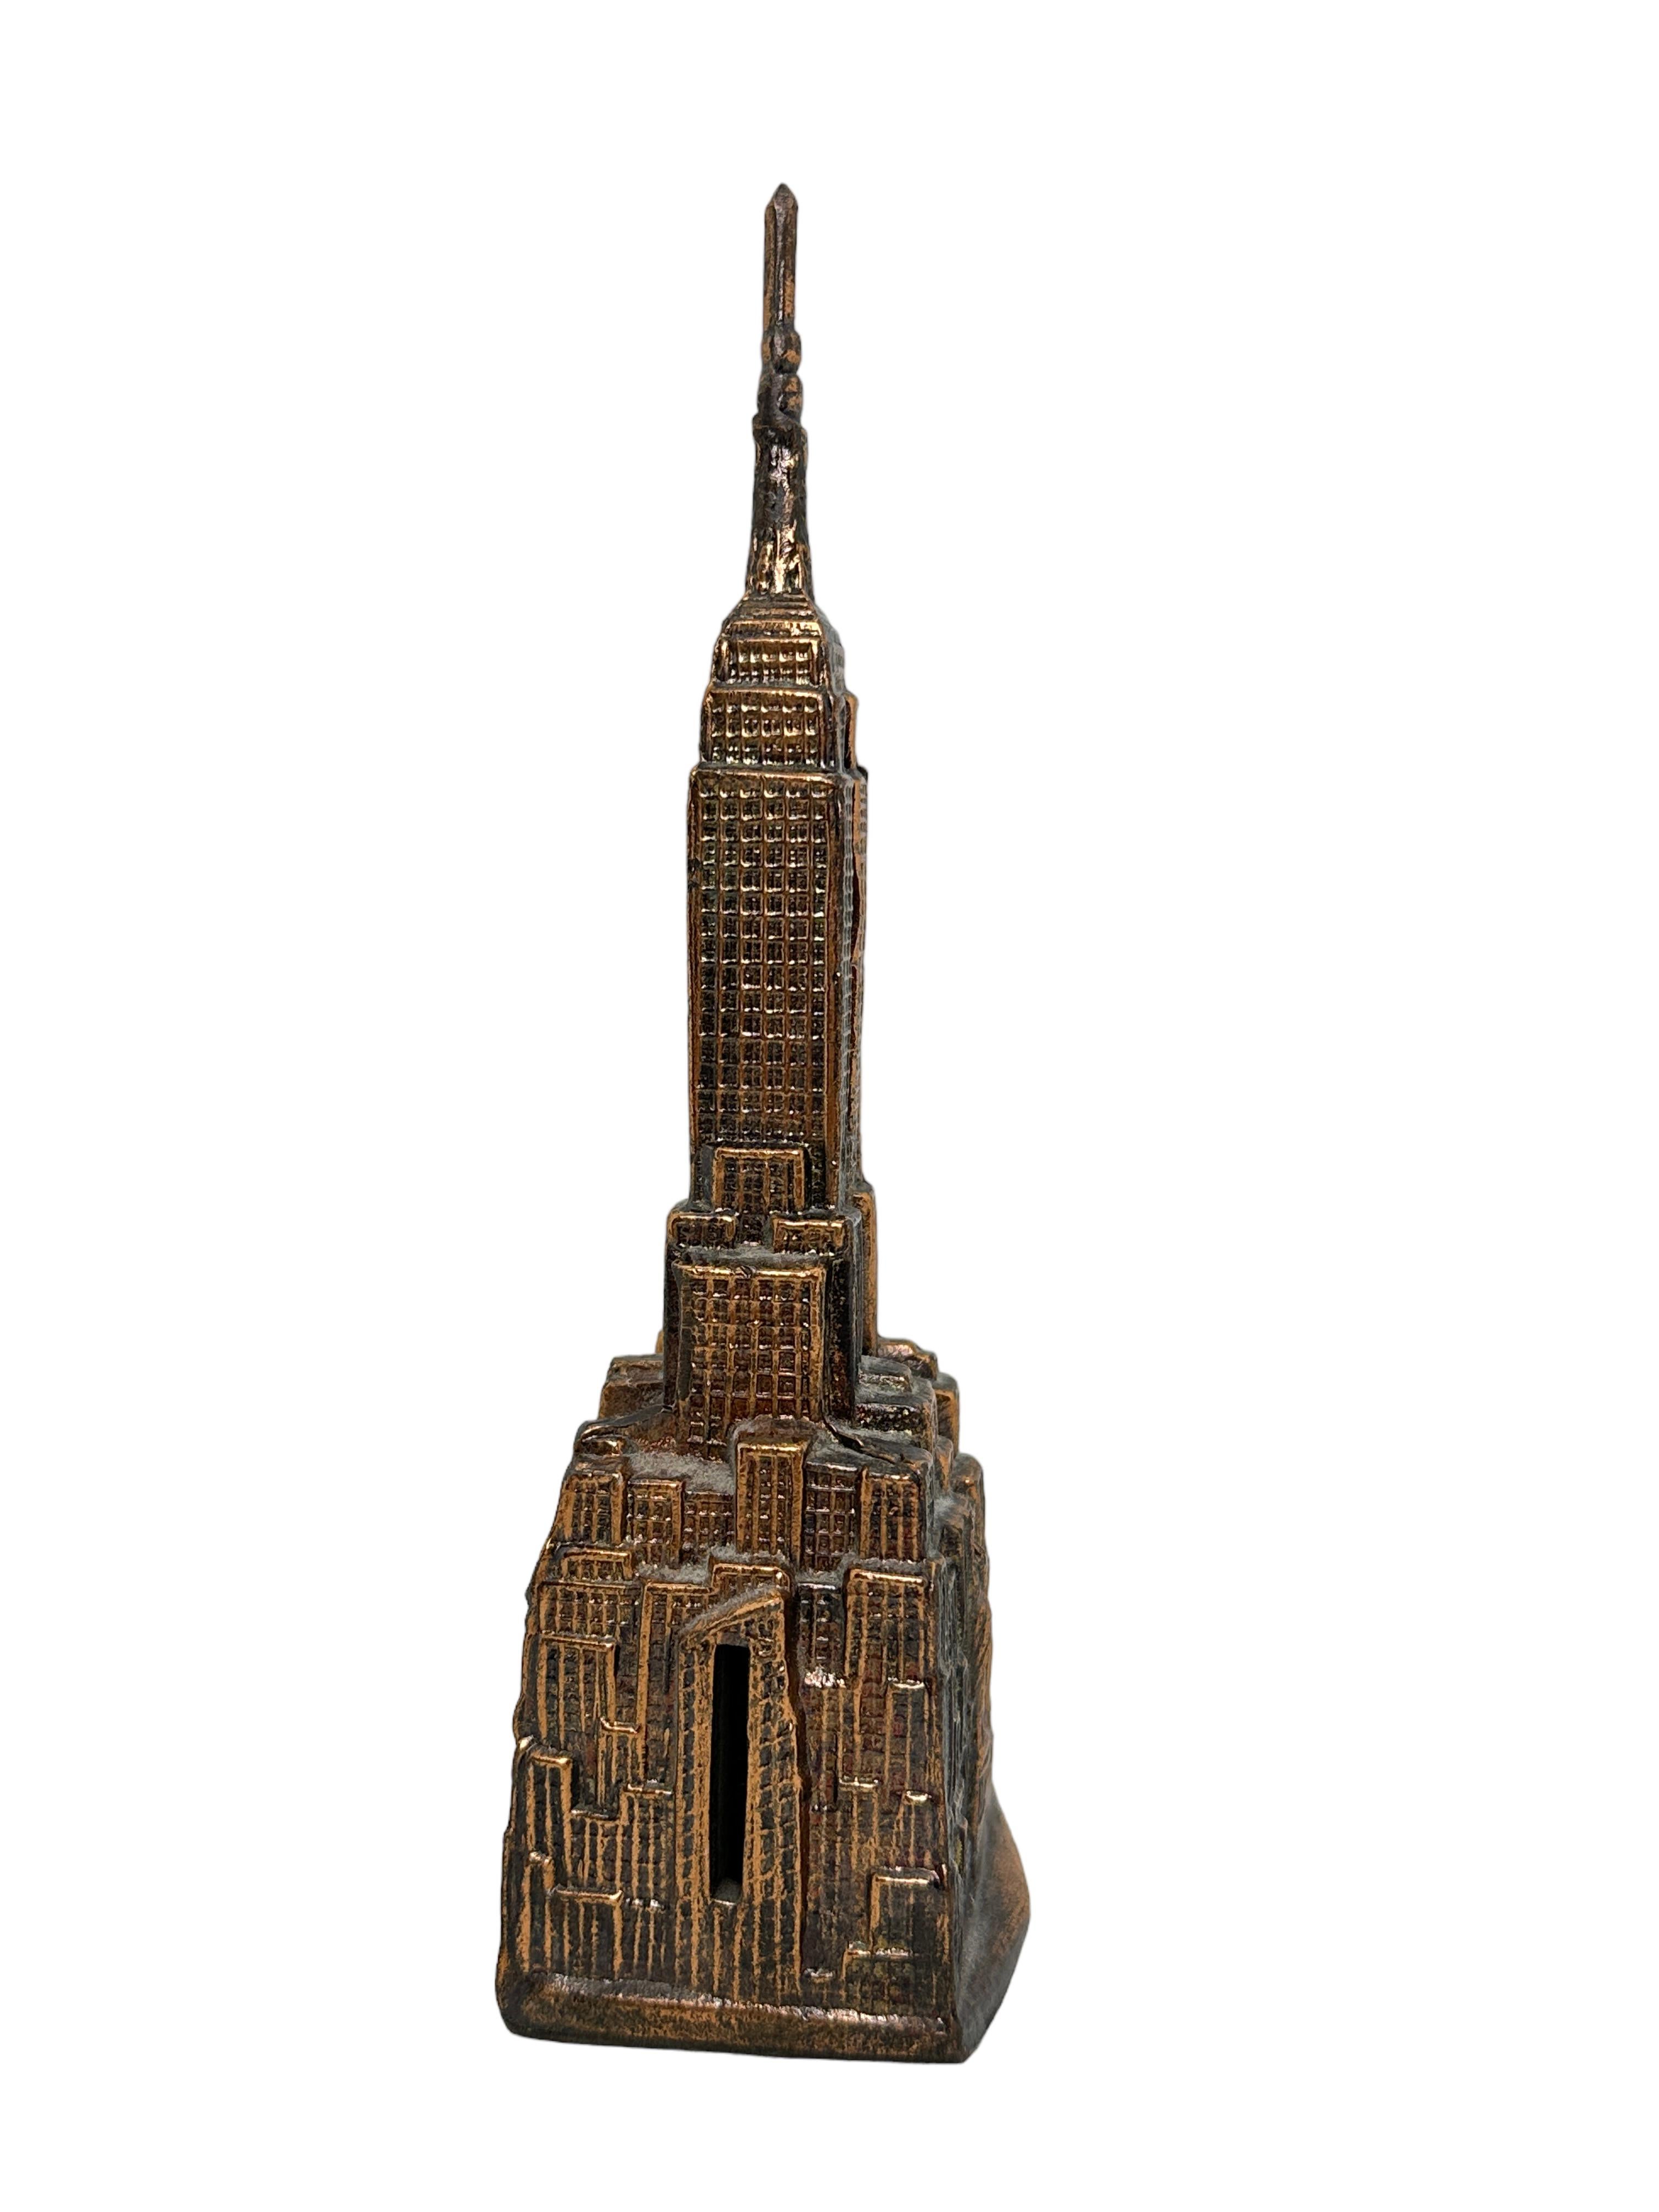 Gorgeous vintage metal money bank. Made of copper metal, this collectible bank, in the shape of New York’s Empire State Building, stands 7 5/8” tall. Nice addition to any collection, desktop, living room or children's room.